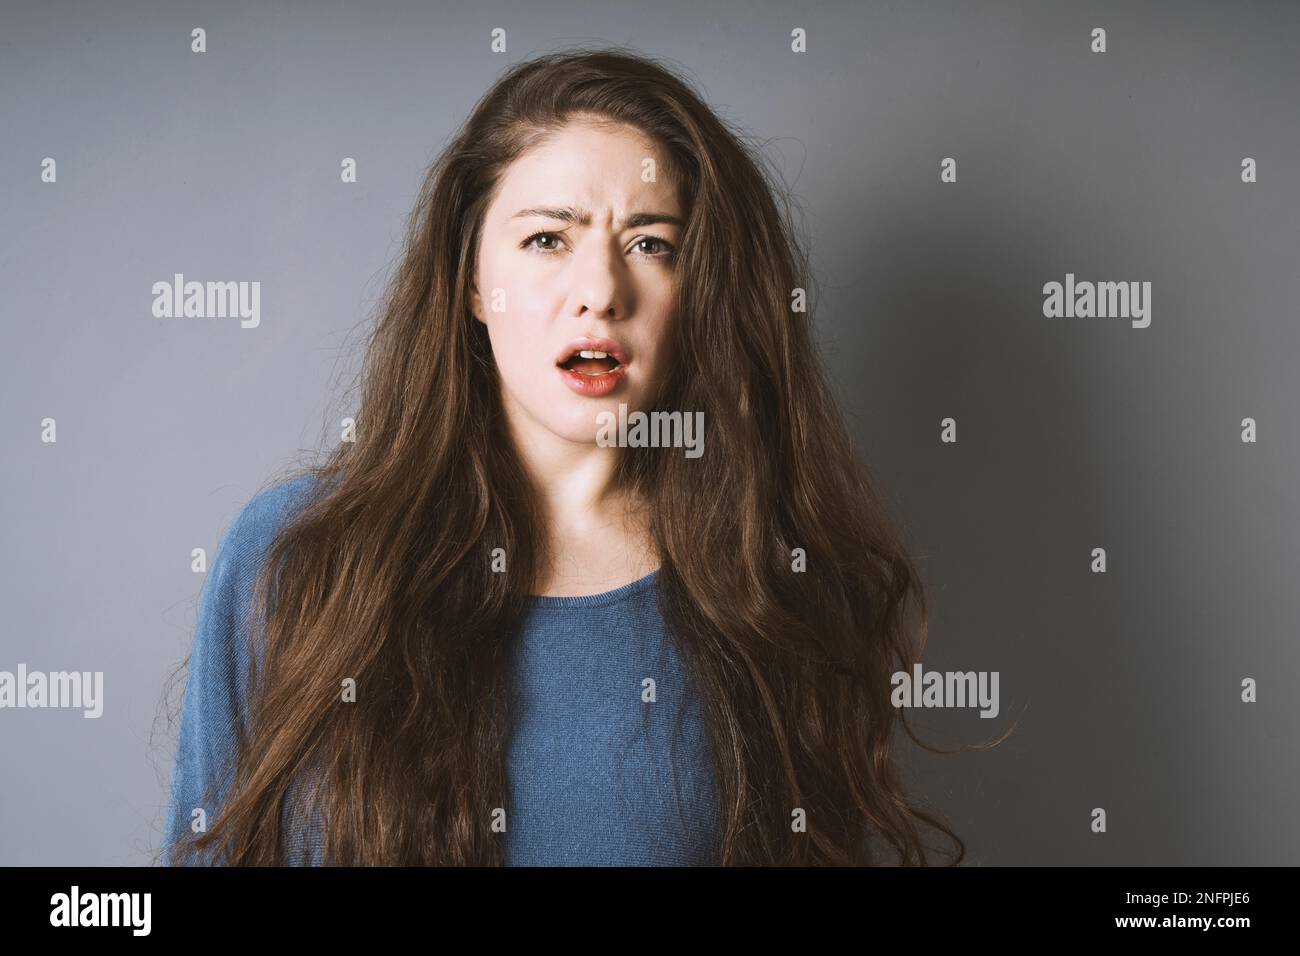 stunned shocked young woman is taken aback and left speechless with open mouth Stock Photo